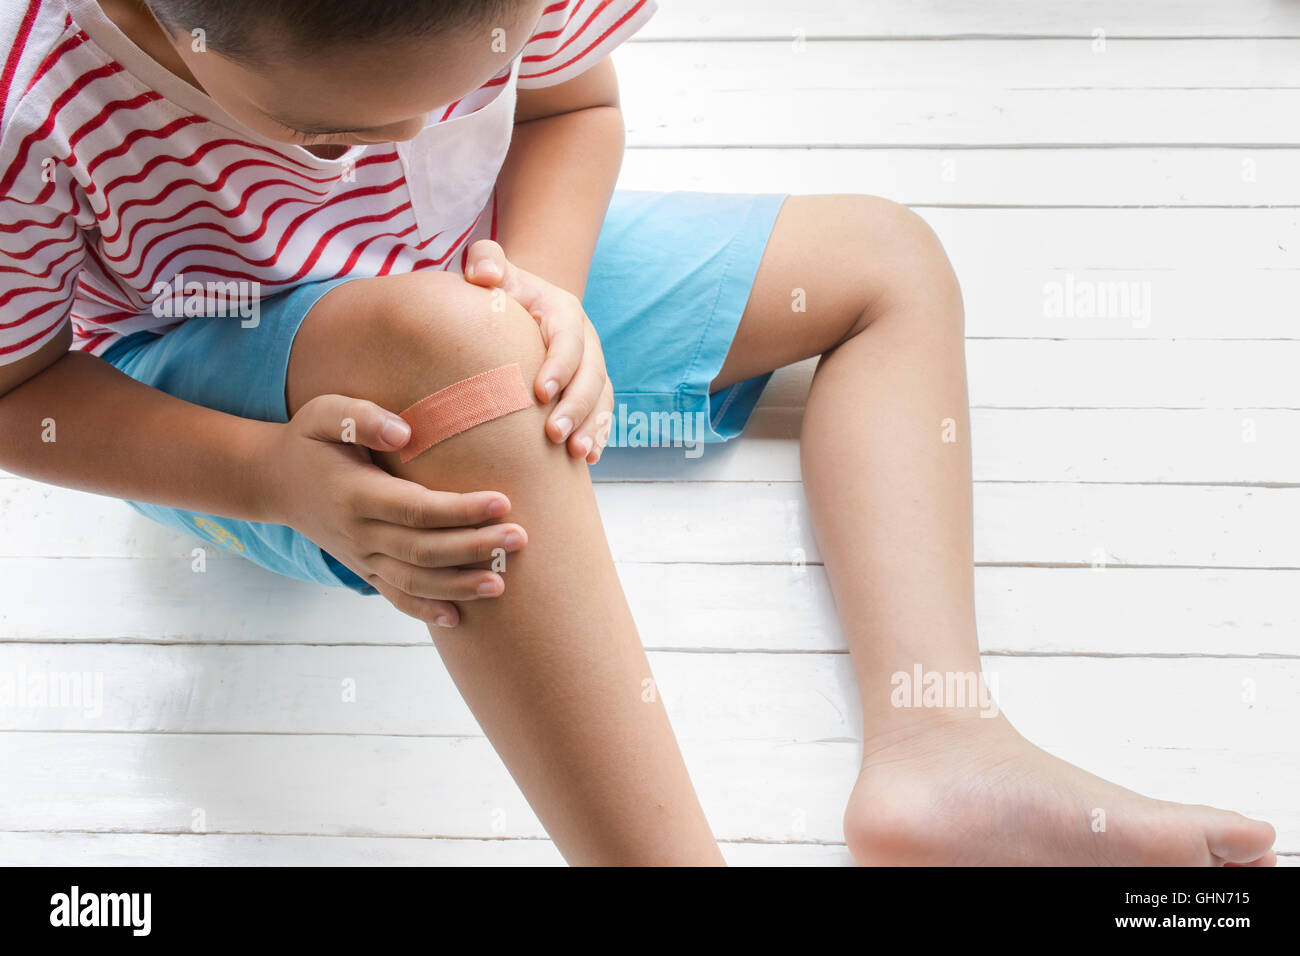 Children wound or The boy had an accident sitting on wooden white background.Top view and Stock Photo